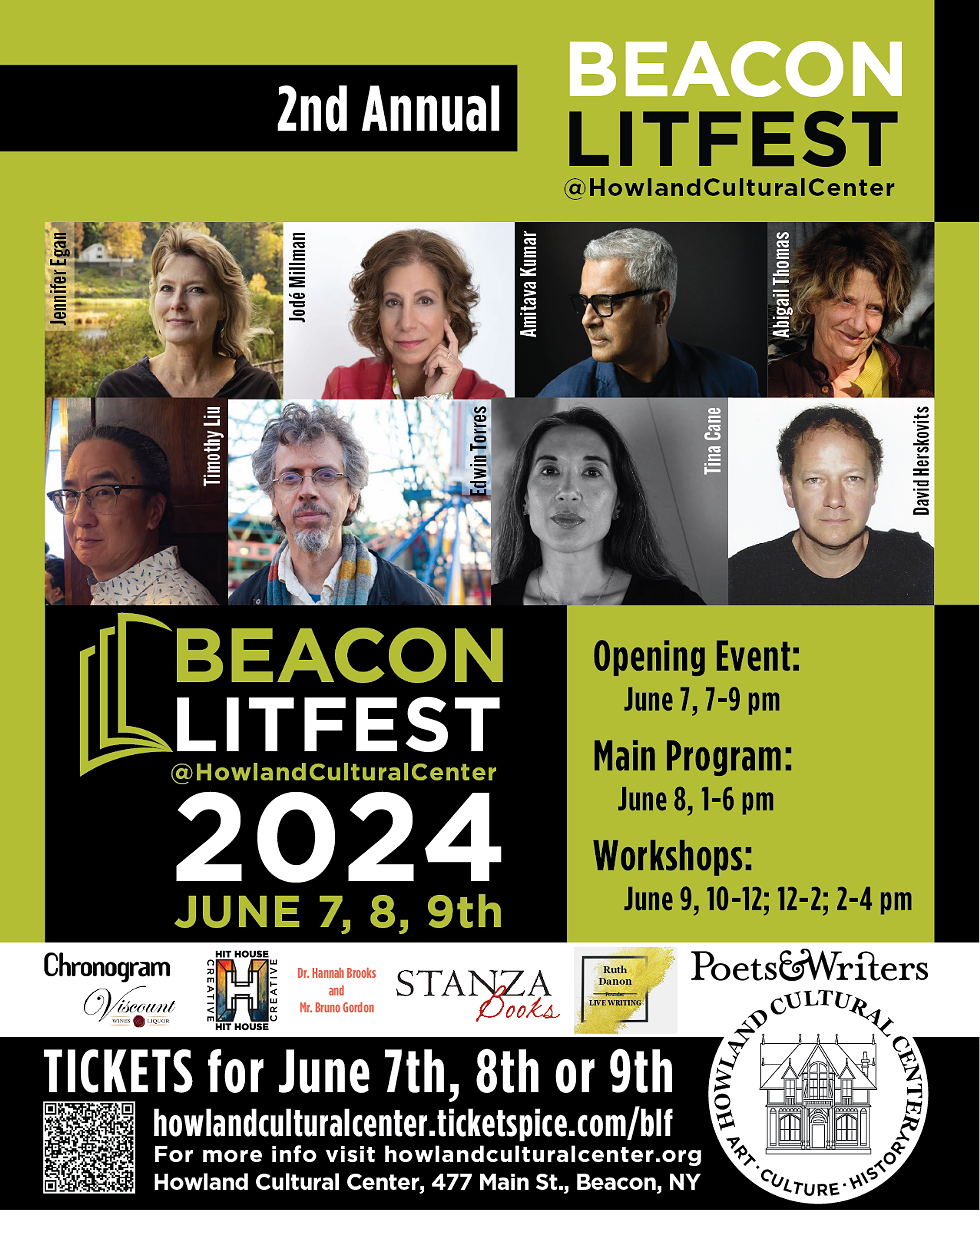 2nd Annual BEACON LITFEST 2024, June 7, 8, 9th